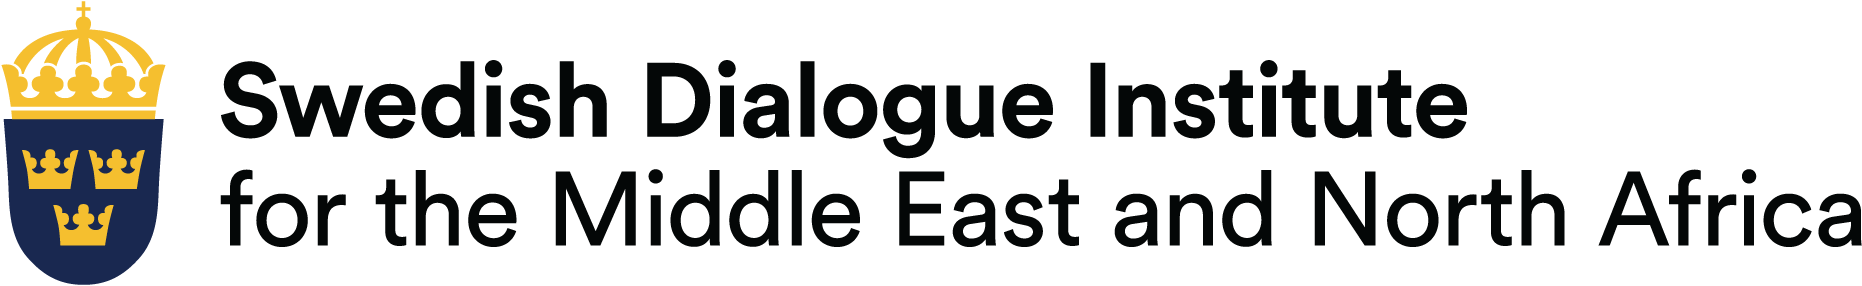 The Swedish Dialogue Institute for the Middle East and North Africa